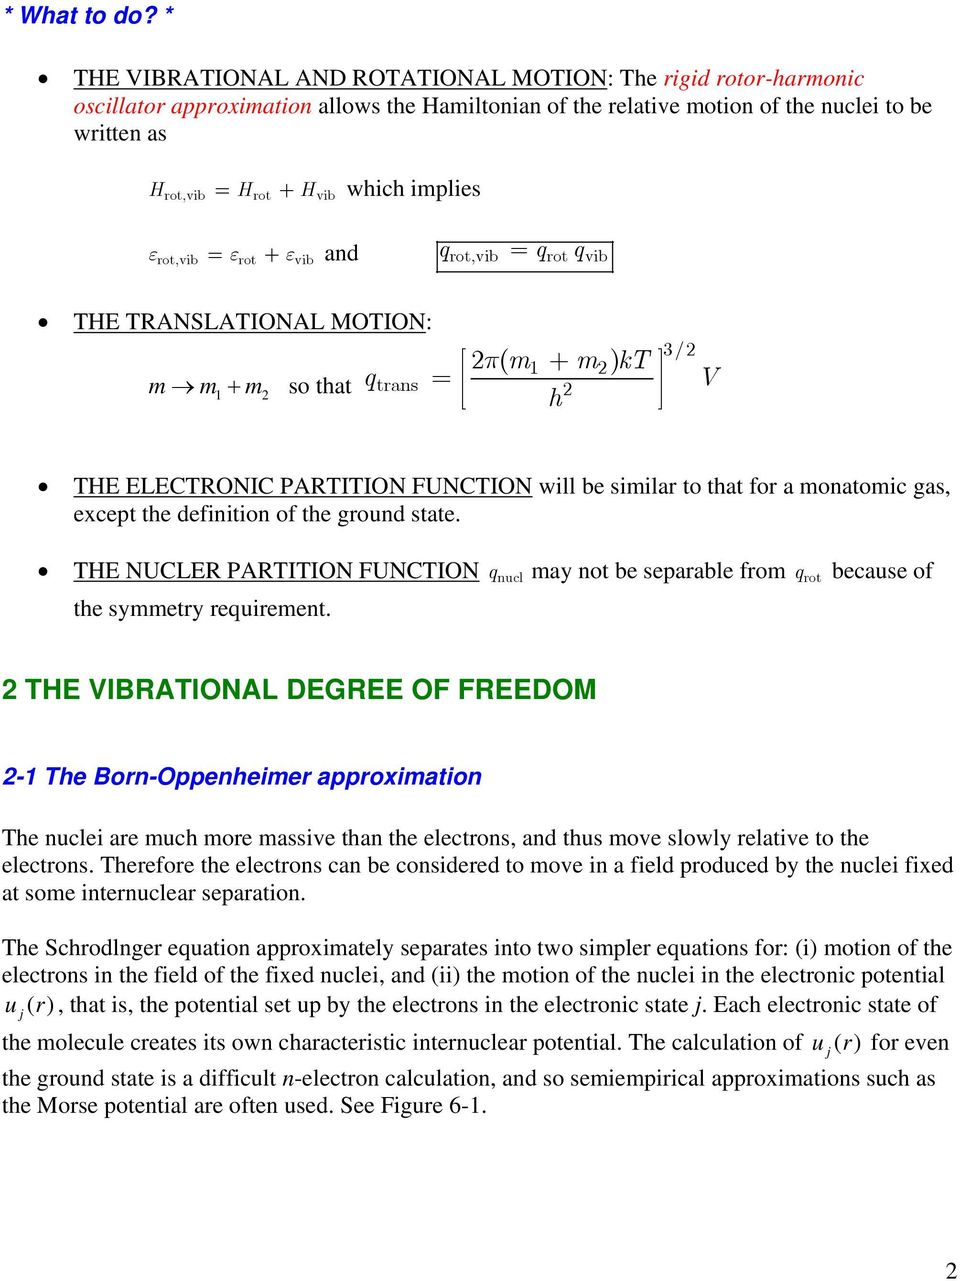 ε + ε and qot,vib = qot qvib ot,vib ot vib THE TRANSLATIONAL MOTION: m m1+ m so that q π( m + m ) kt = h 1 tans 3/ V THE ELECTRONIC PARTITION FUNCTION will be simila to that fo a monatomic gas,